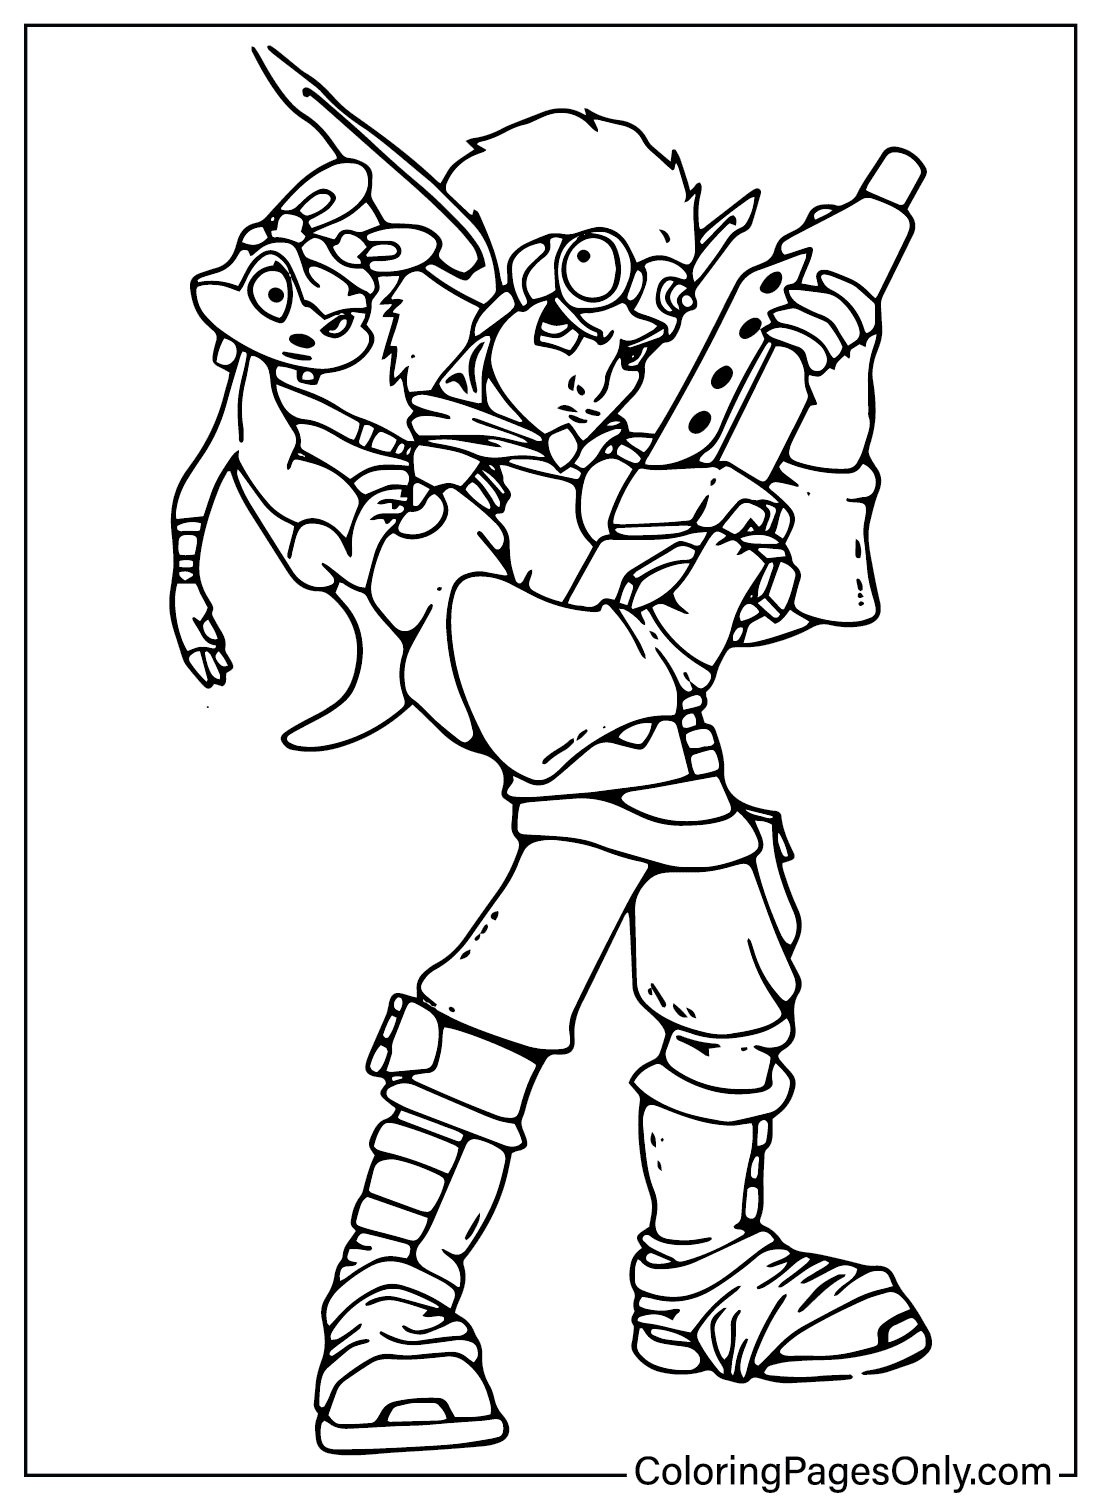 Color Page Jak and Daxter - Free Printable Coloring Pages